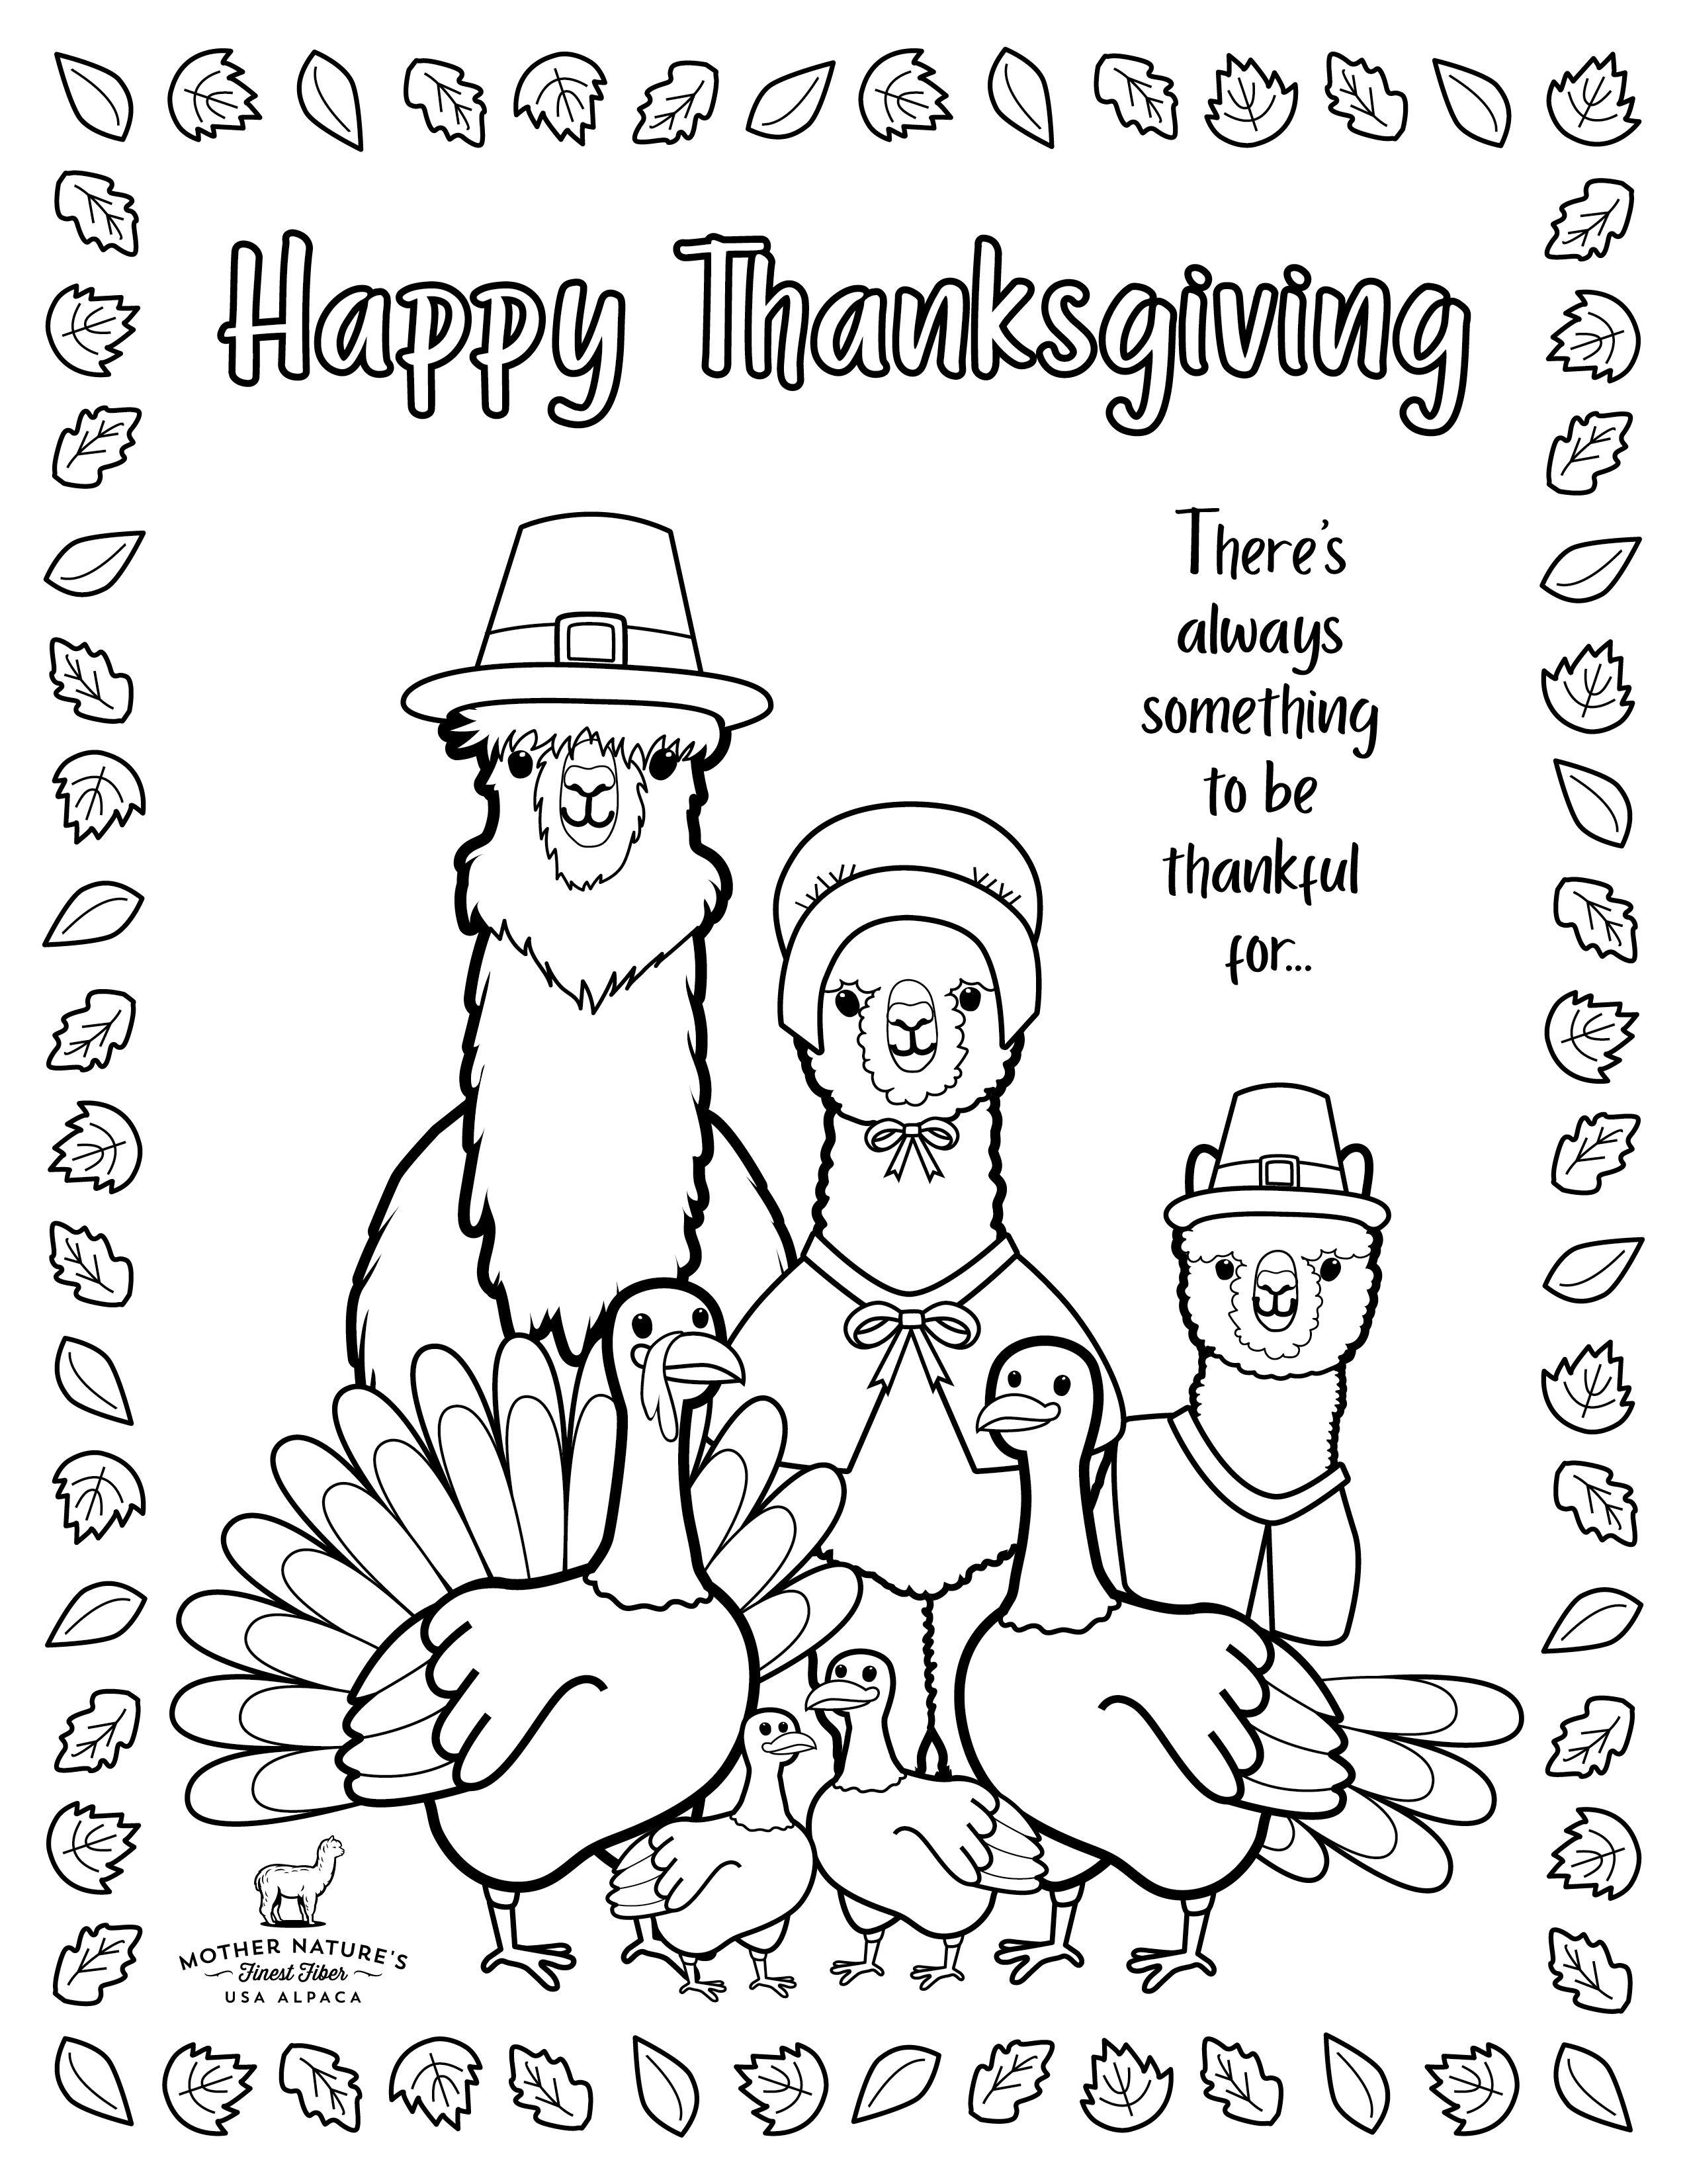 New downloadable content thanksgiving coloring page